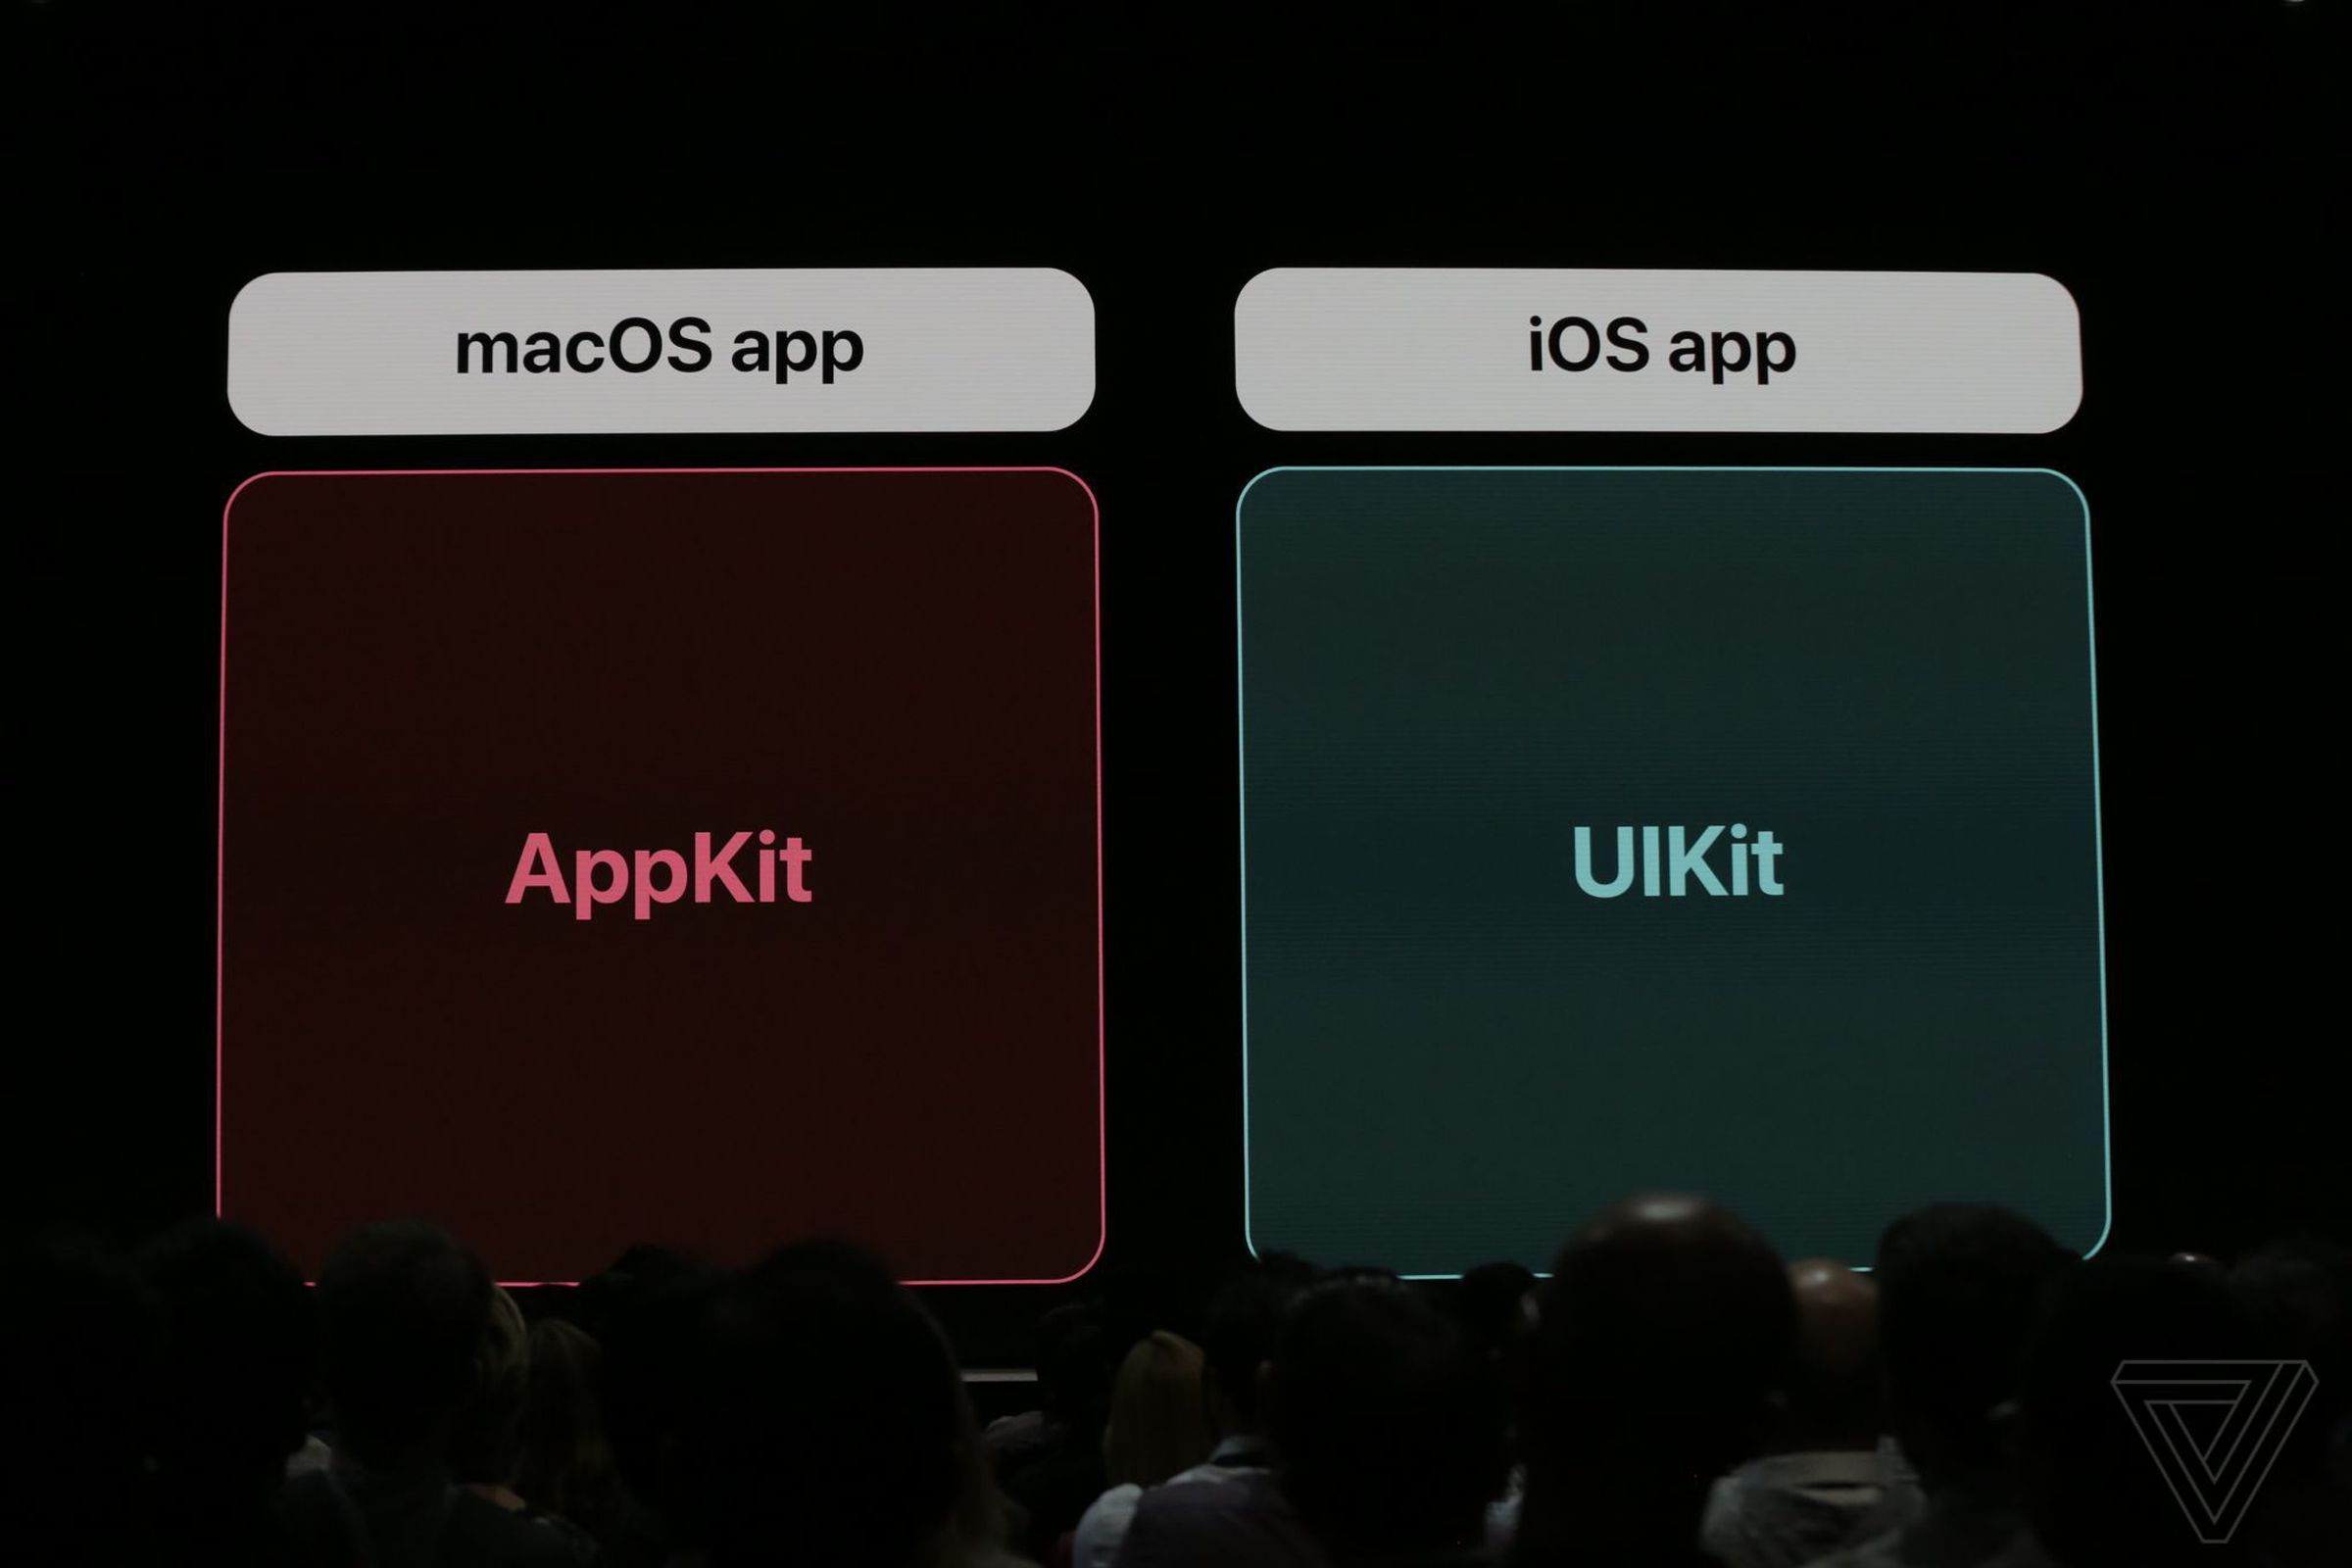 Pre-Marzipan: macOS apps are AppKit-based, and iOS apps are UIKit